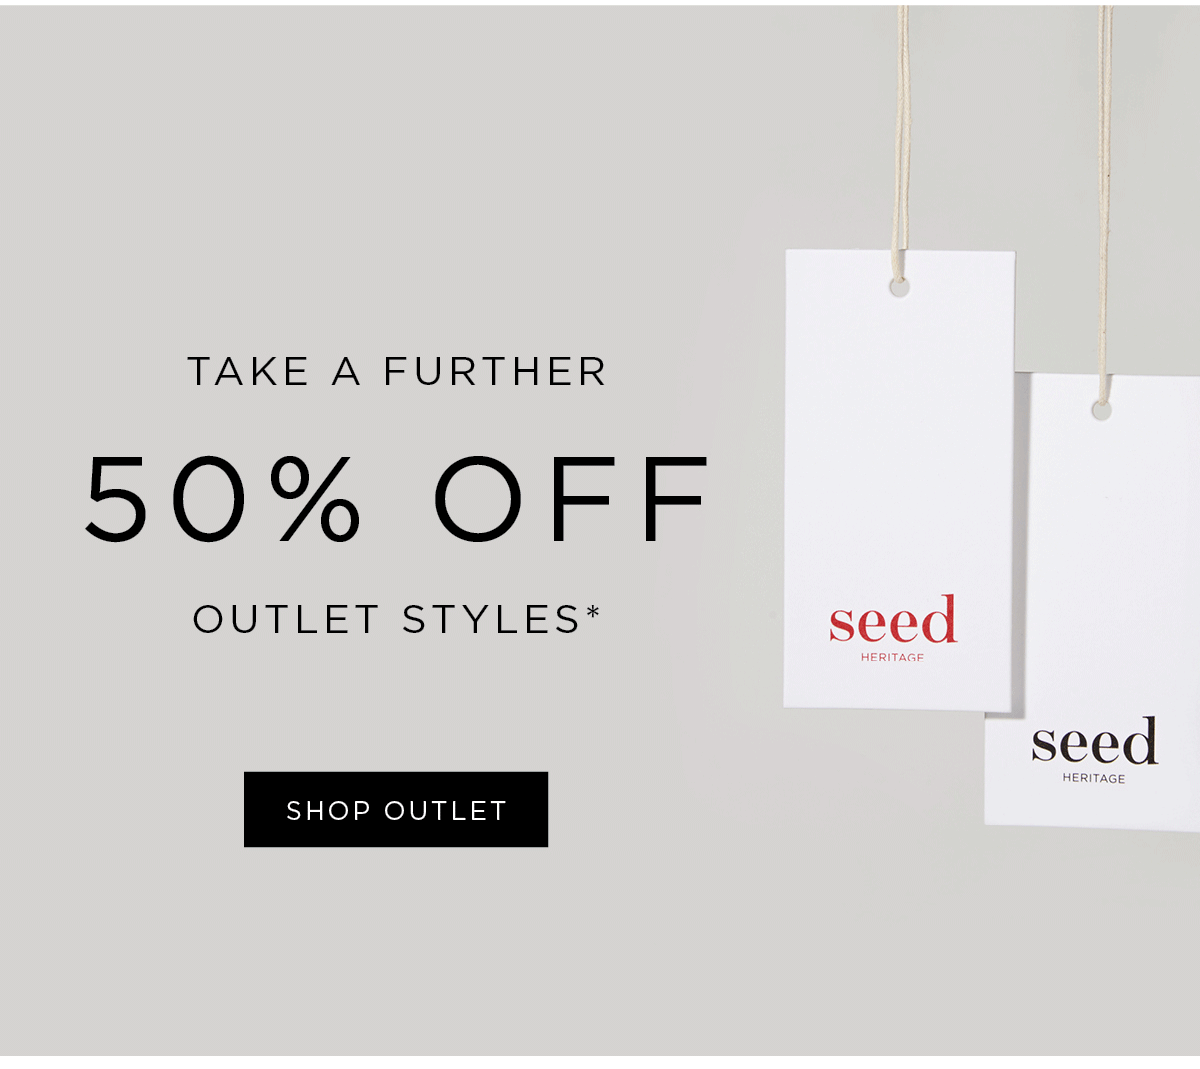 Take A Further 50% Off Outlet Styles